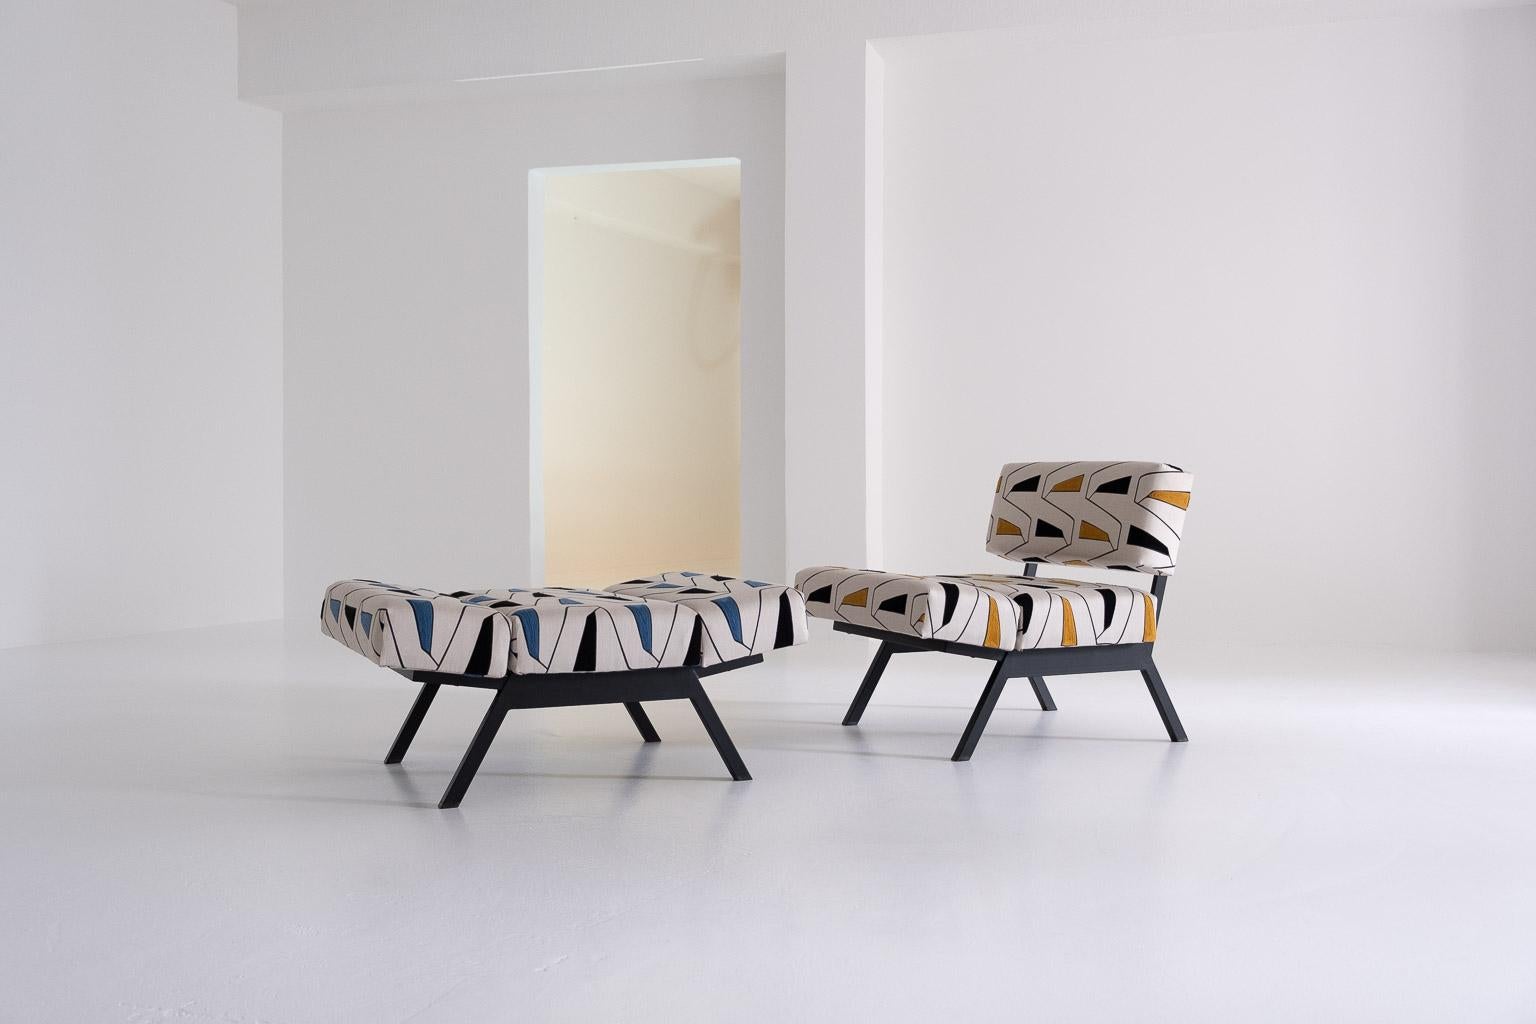 2 two ‚panchetto' reclining chairs by rito valla for ip. the paddings are expertly reupholstered (including handstitching) in two different colour sets of the extremely elegant ‚grafico‘ fabric, collection ‚alchimia‘, by french luxury brand